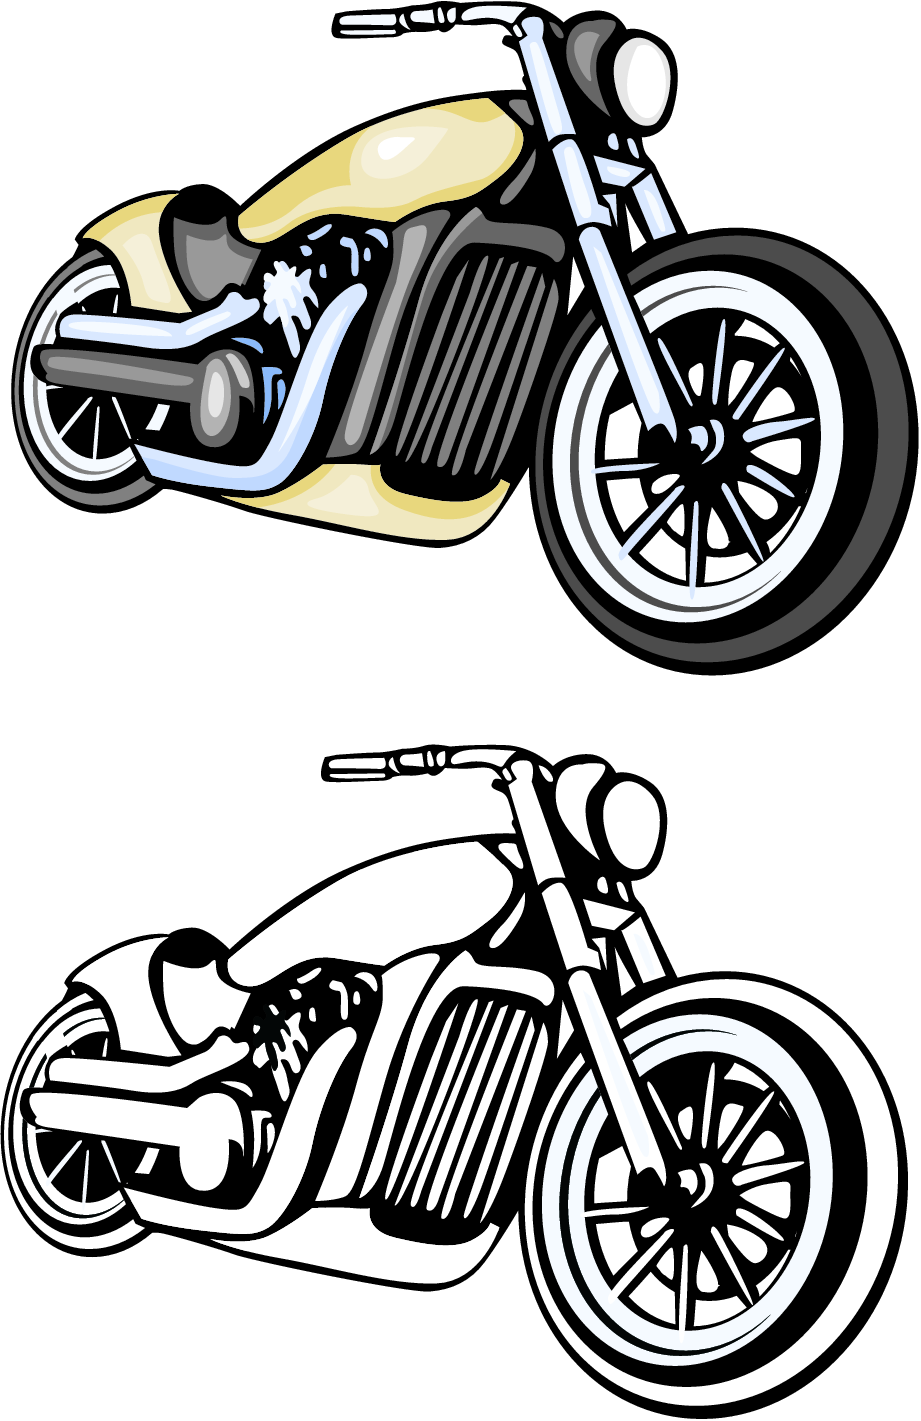 Motorcycle Clipart Hd Images 3 HD Wallpapers | lzamgs.